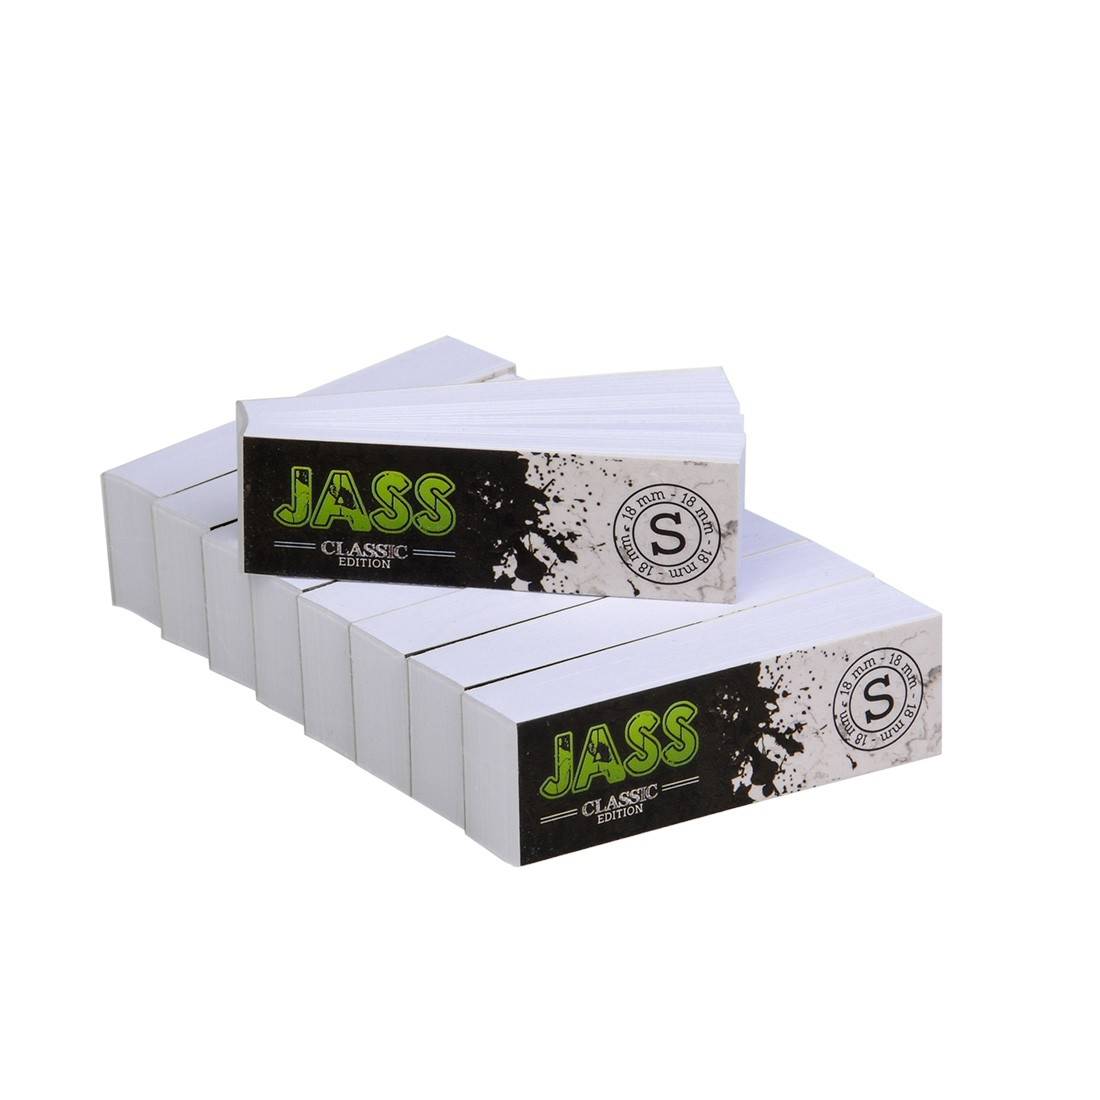 FR .FILTER TIPS JASS CLASSIC EDITION X50 TAILLE S 18mm